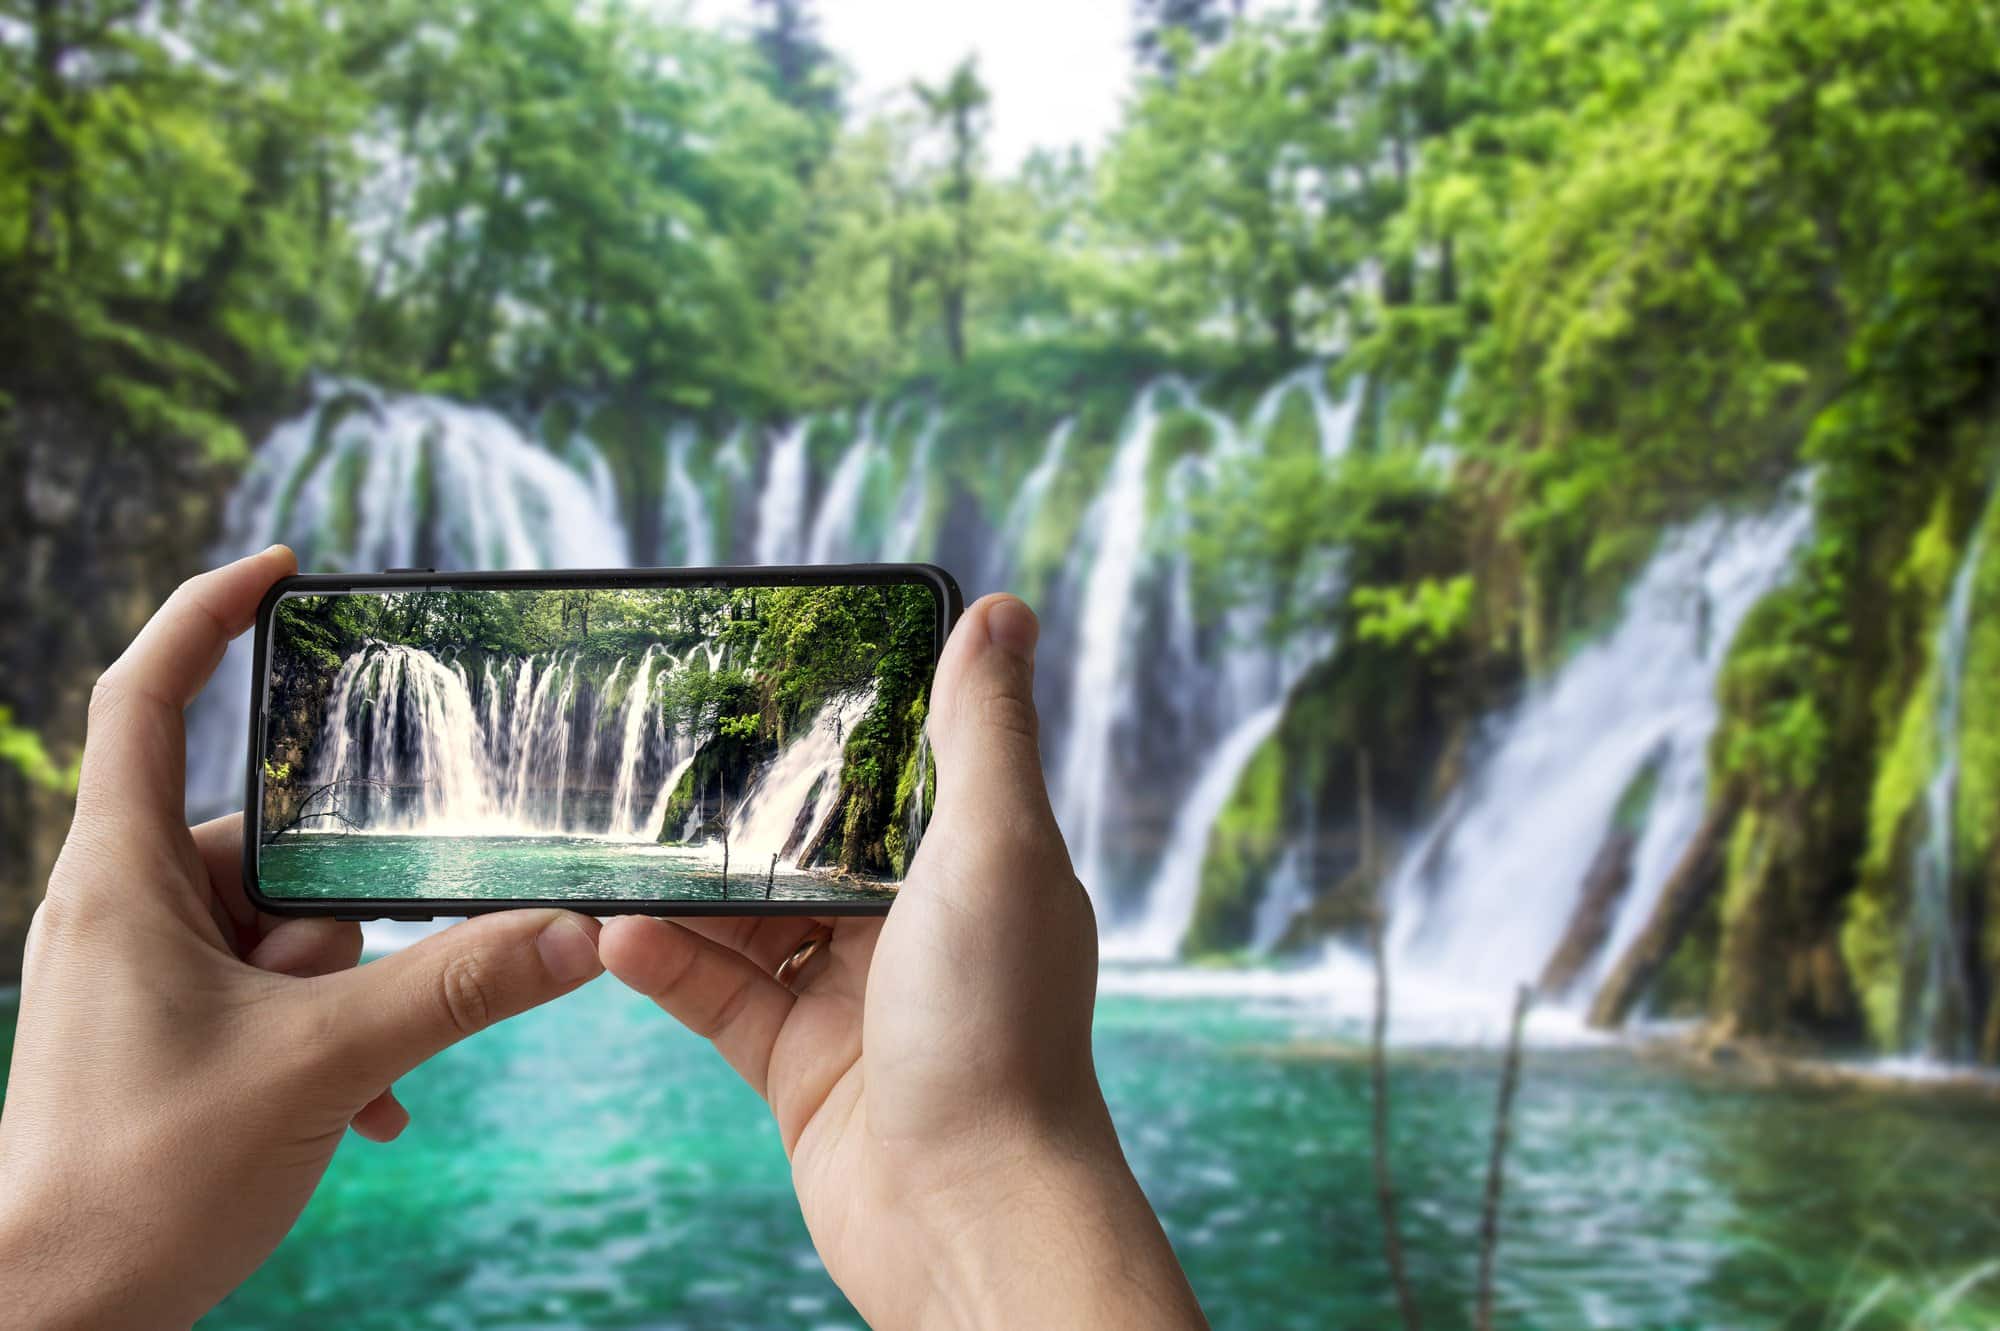 person getting paid to take picture of waterfall for stock photo website